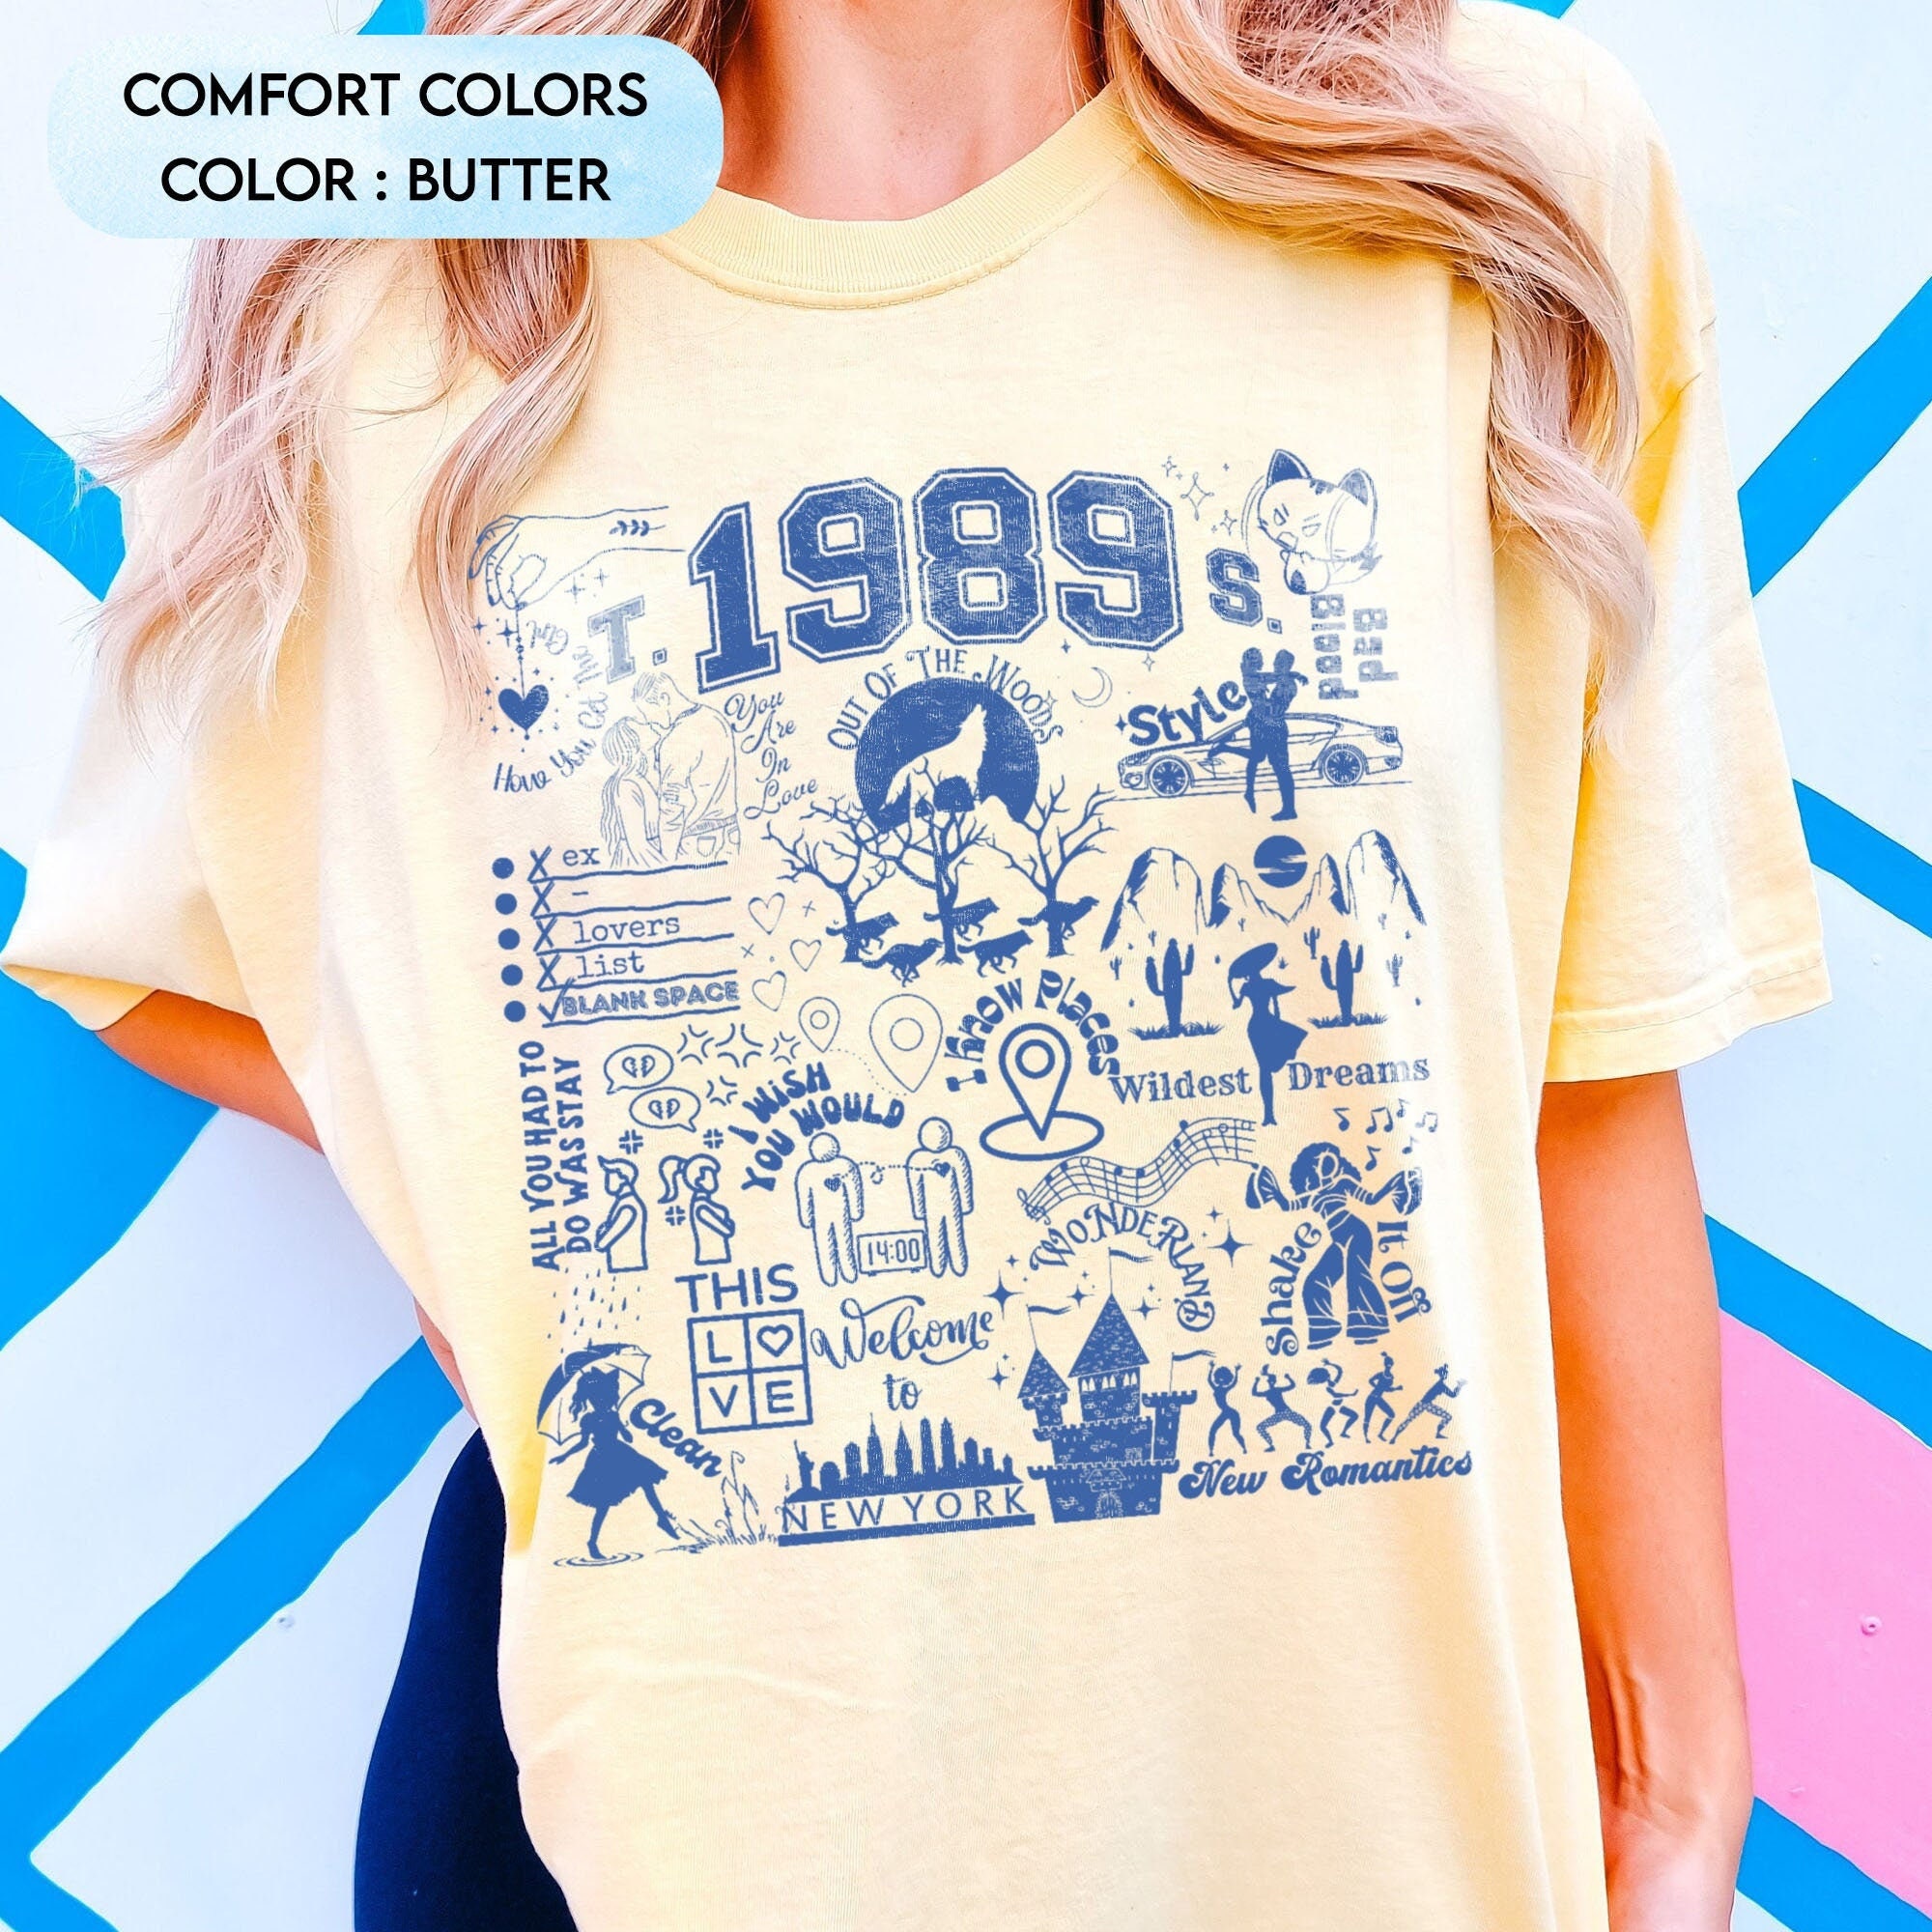 1989 (Taylor's Version) Eras Long Sleeve T-Shirt – Taylor Swift Official  Store